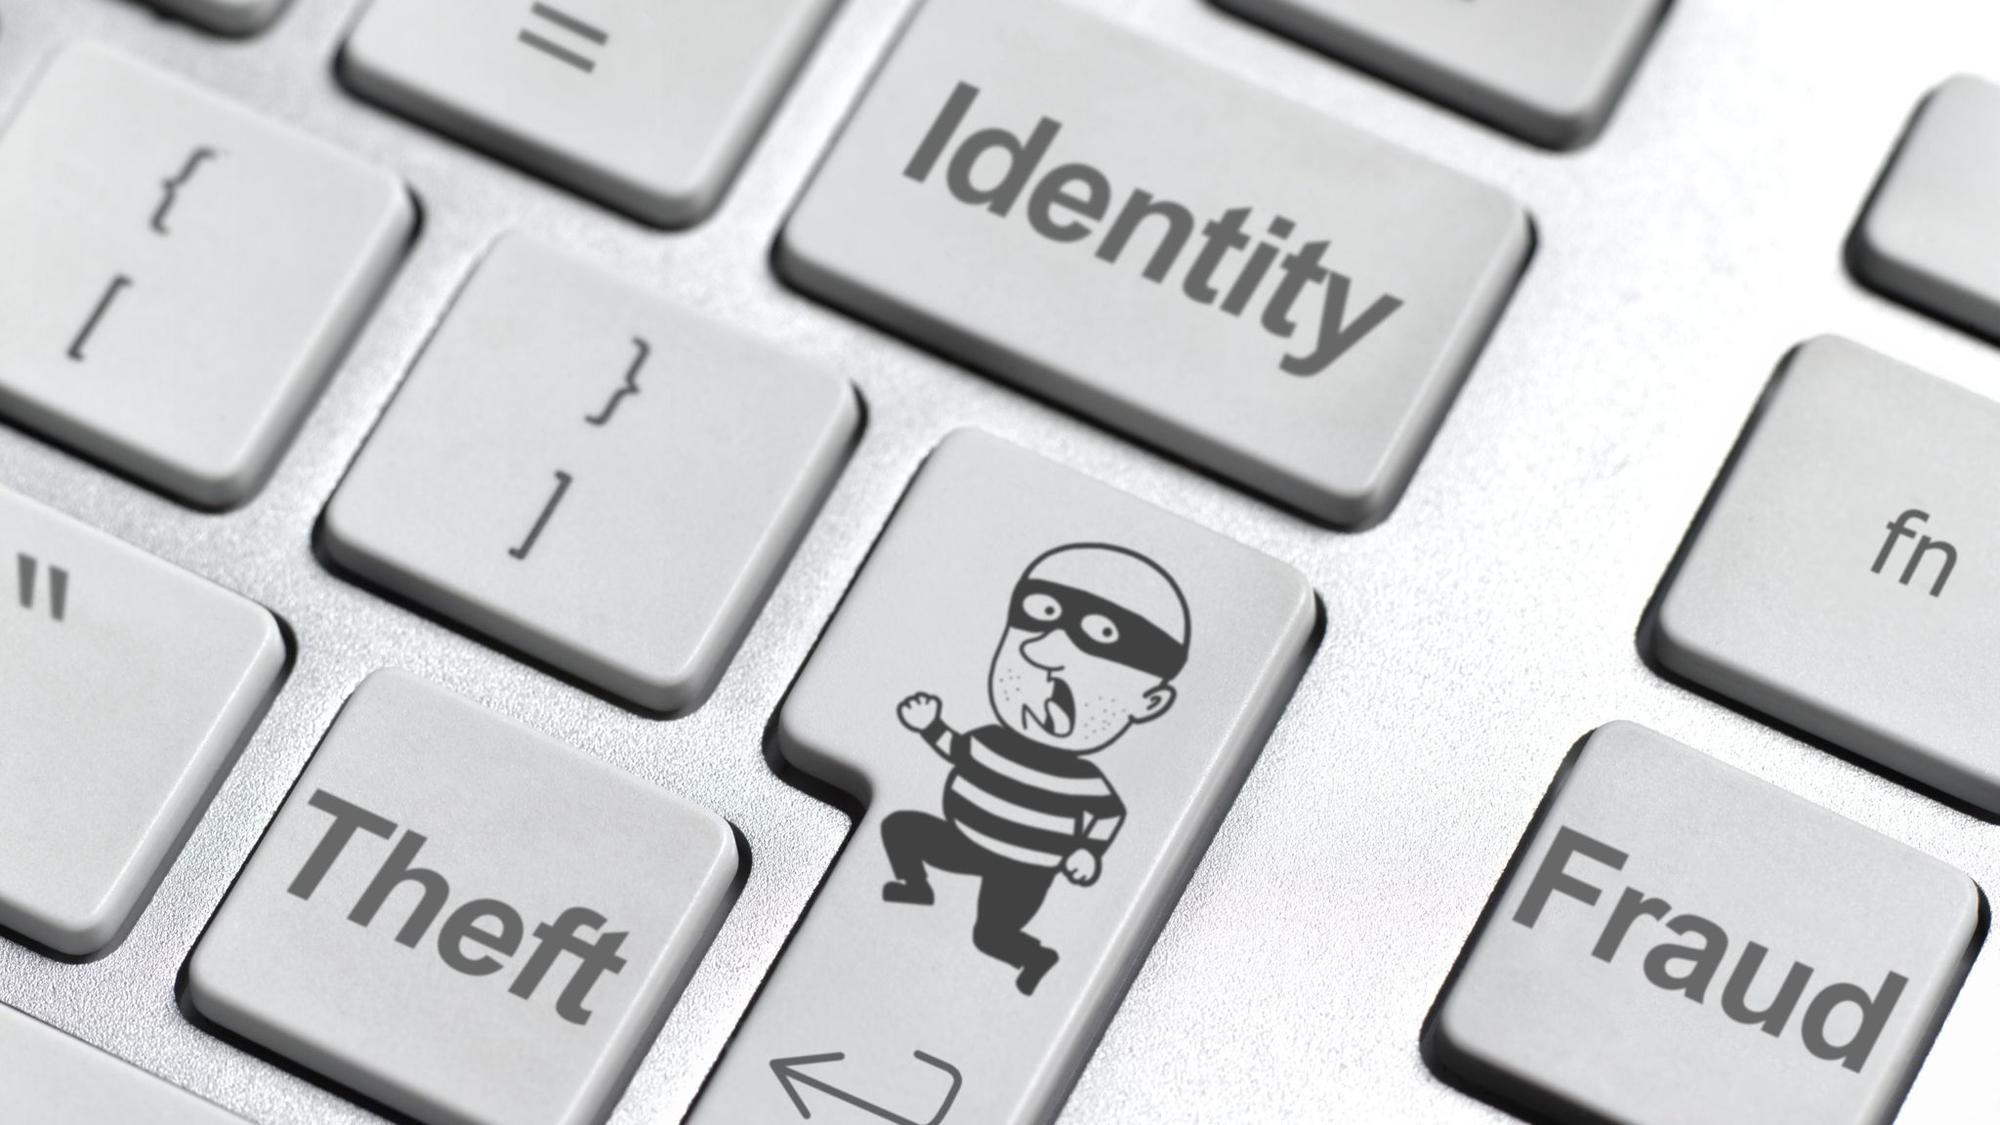 Helpful Information On How To Stop Identification Theft